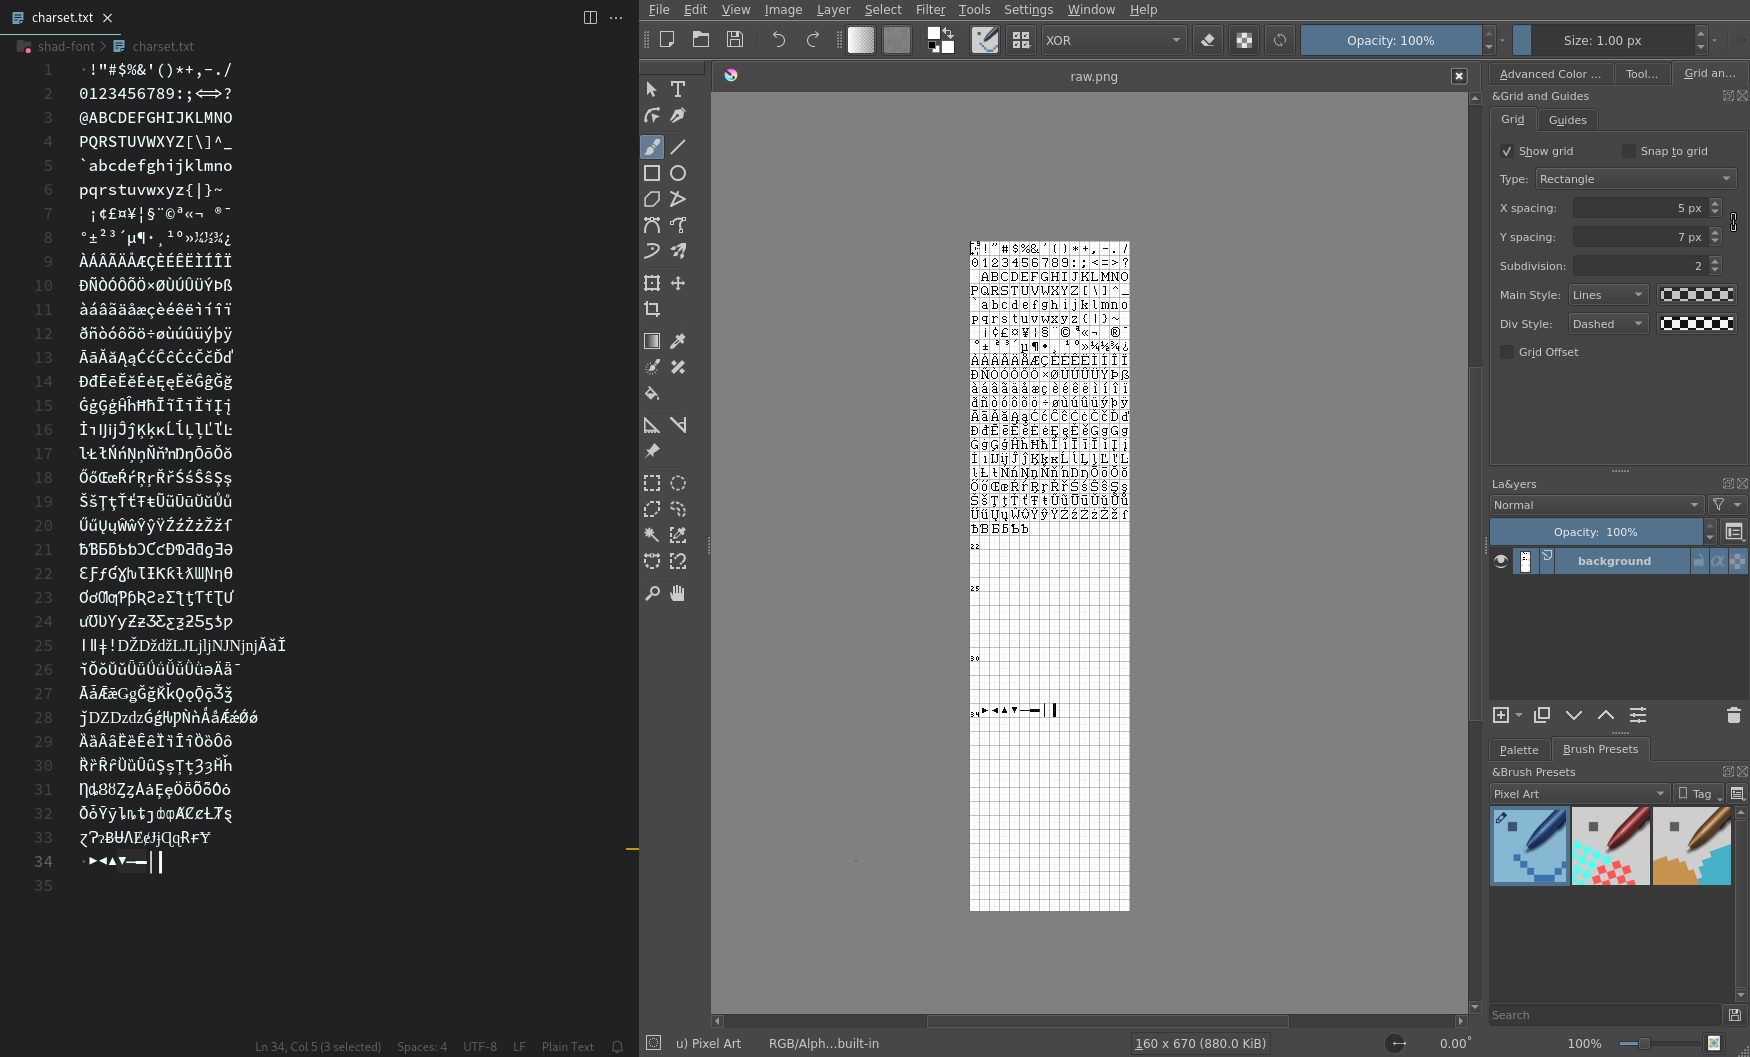 Screenshot of a font in the making, using Krita for drawing the font and a text editor for organization